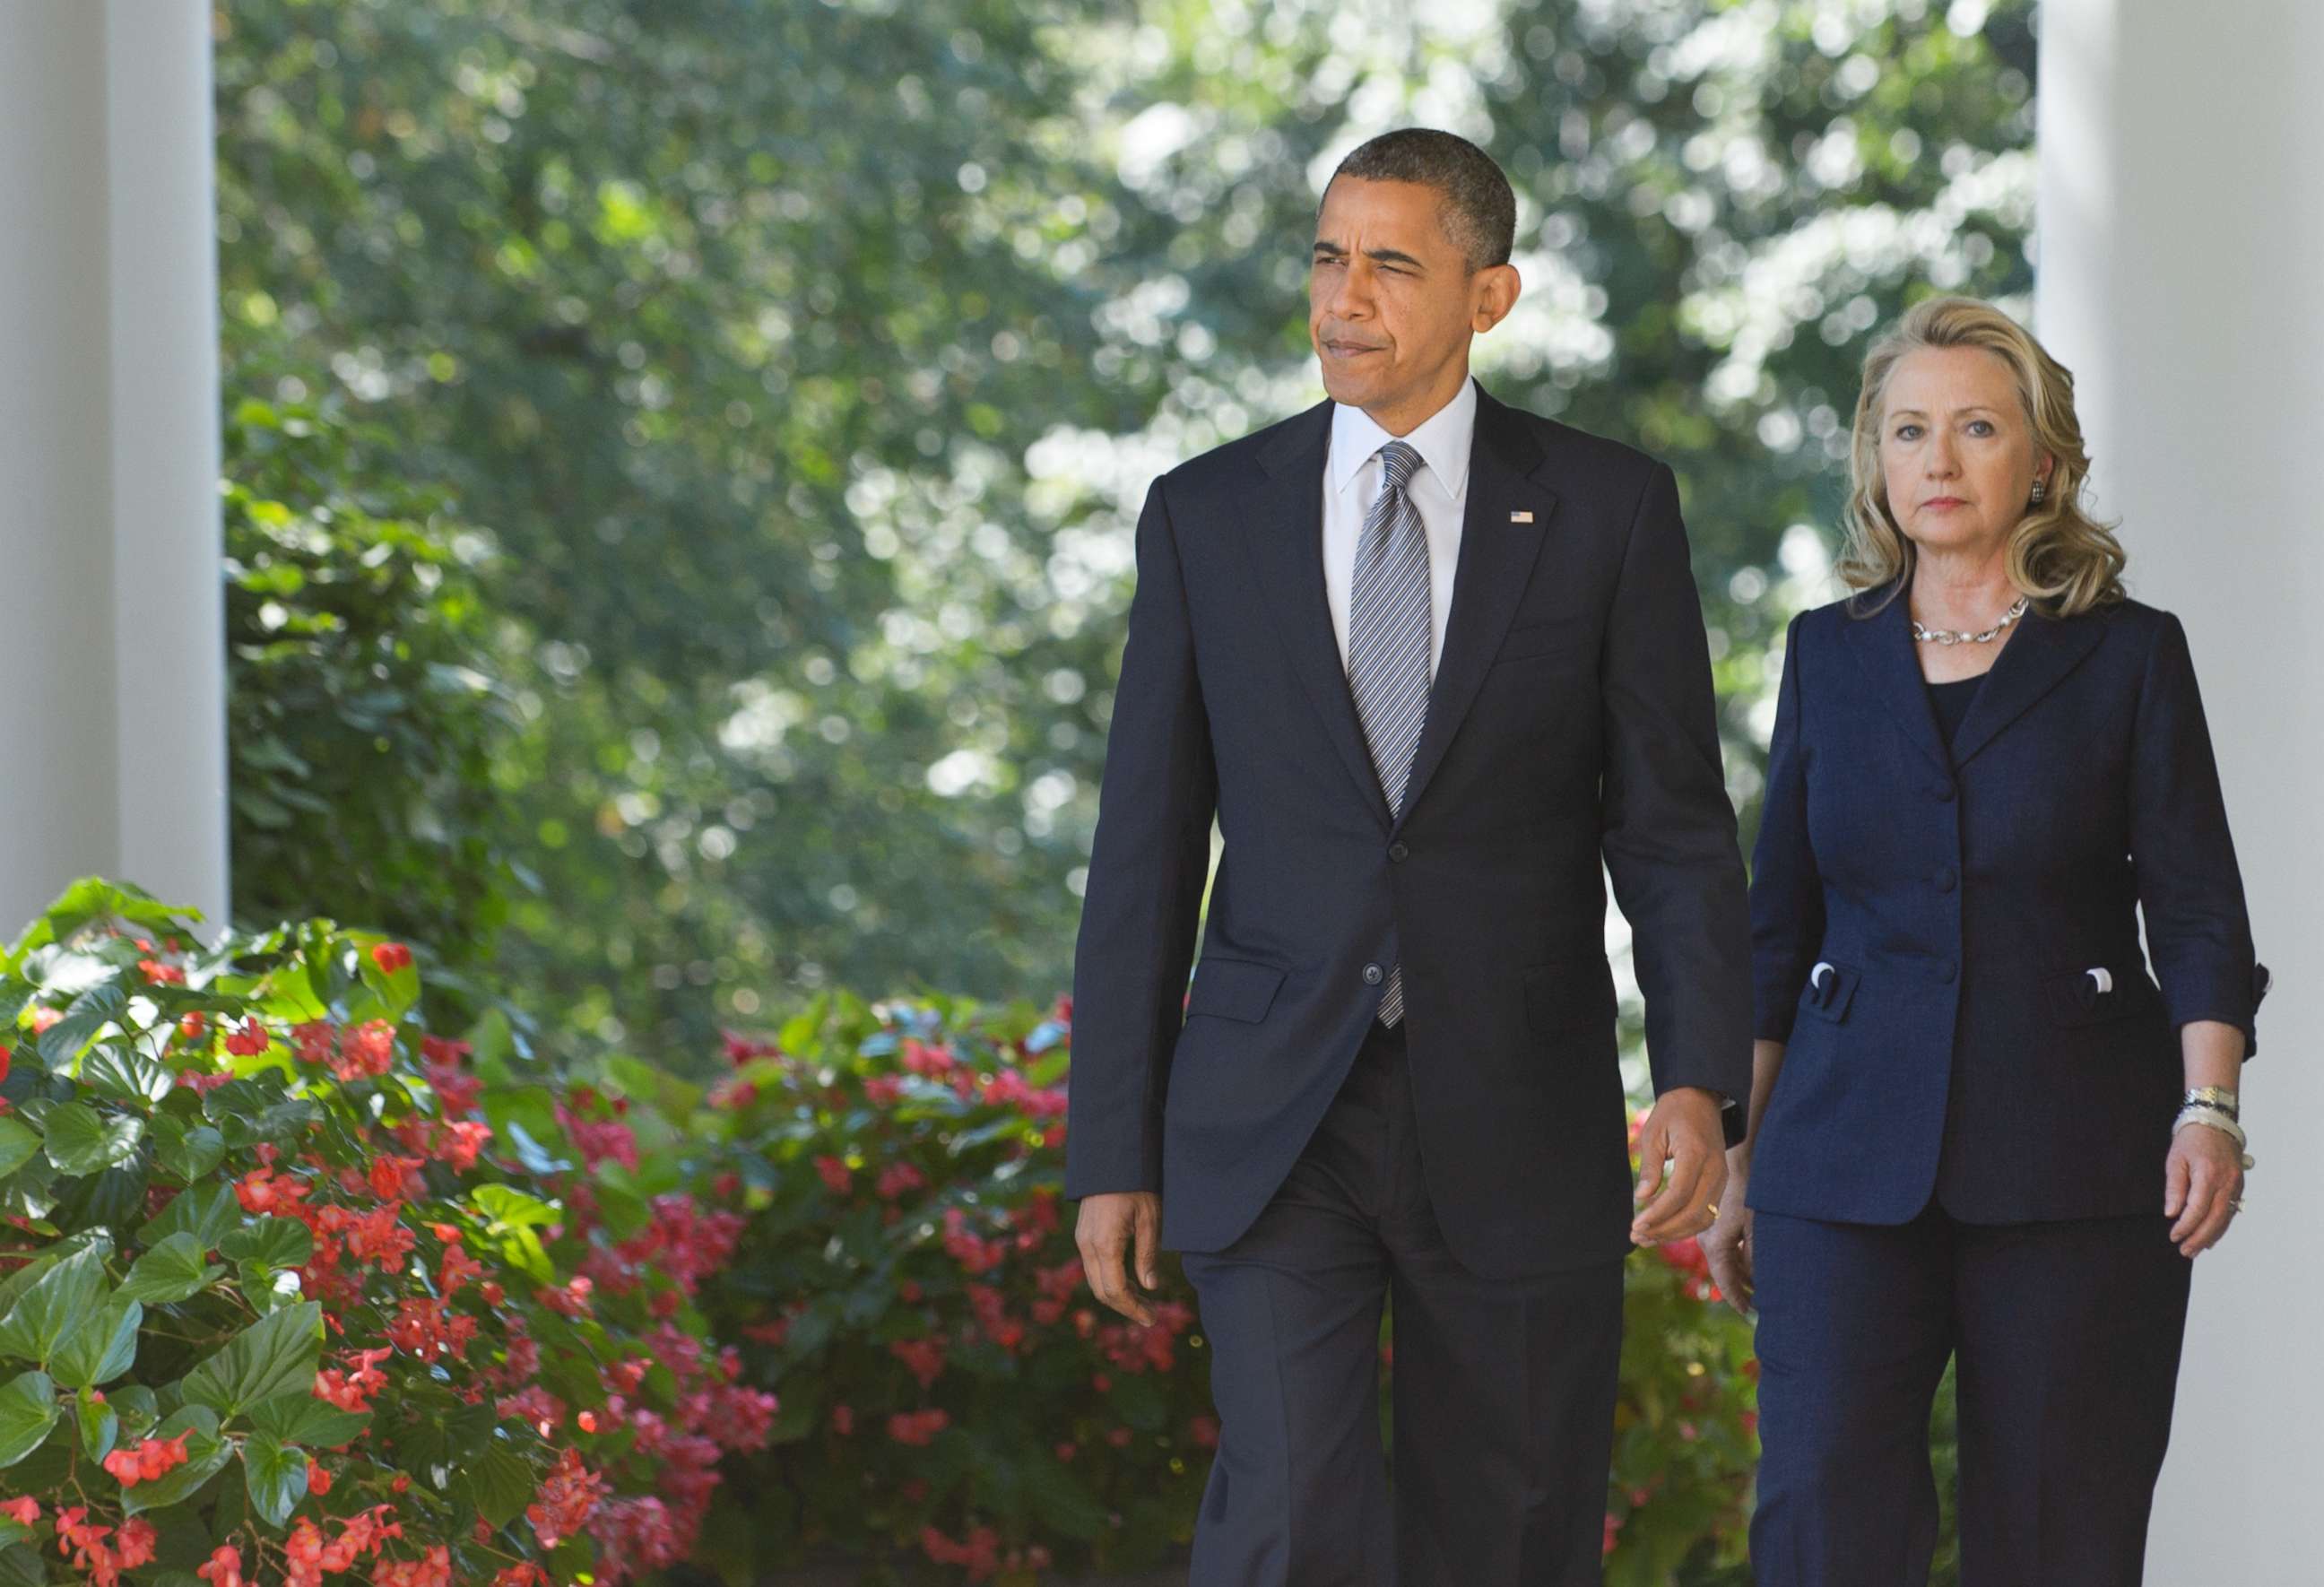 PHOTO: President Barack Obama and Secretary of State Hillary Clinton make their way to deliver a statement in the Rose Garden of the White House, Sept. 12, 2012 in Washington.